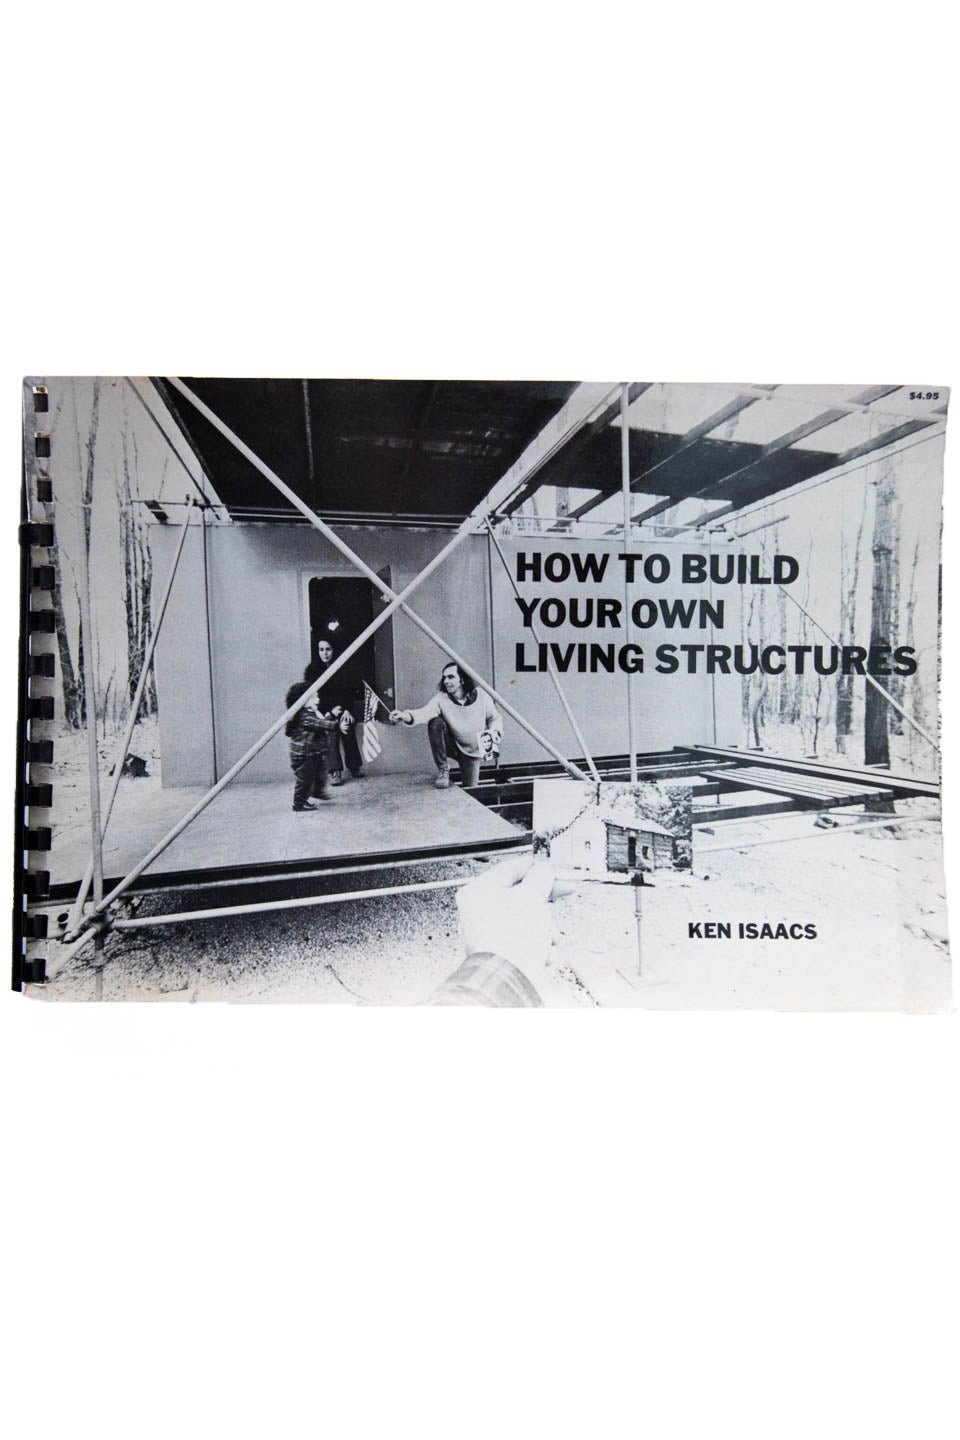 HOW TO BUILD YOUR OWN LIVING STRUCTURES